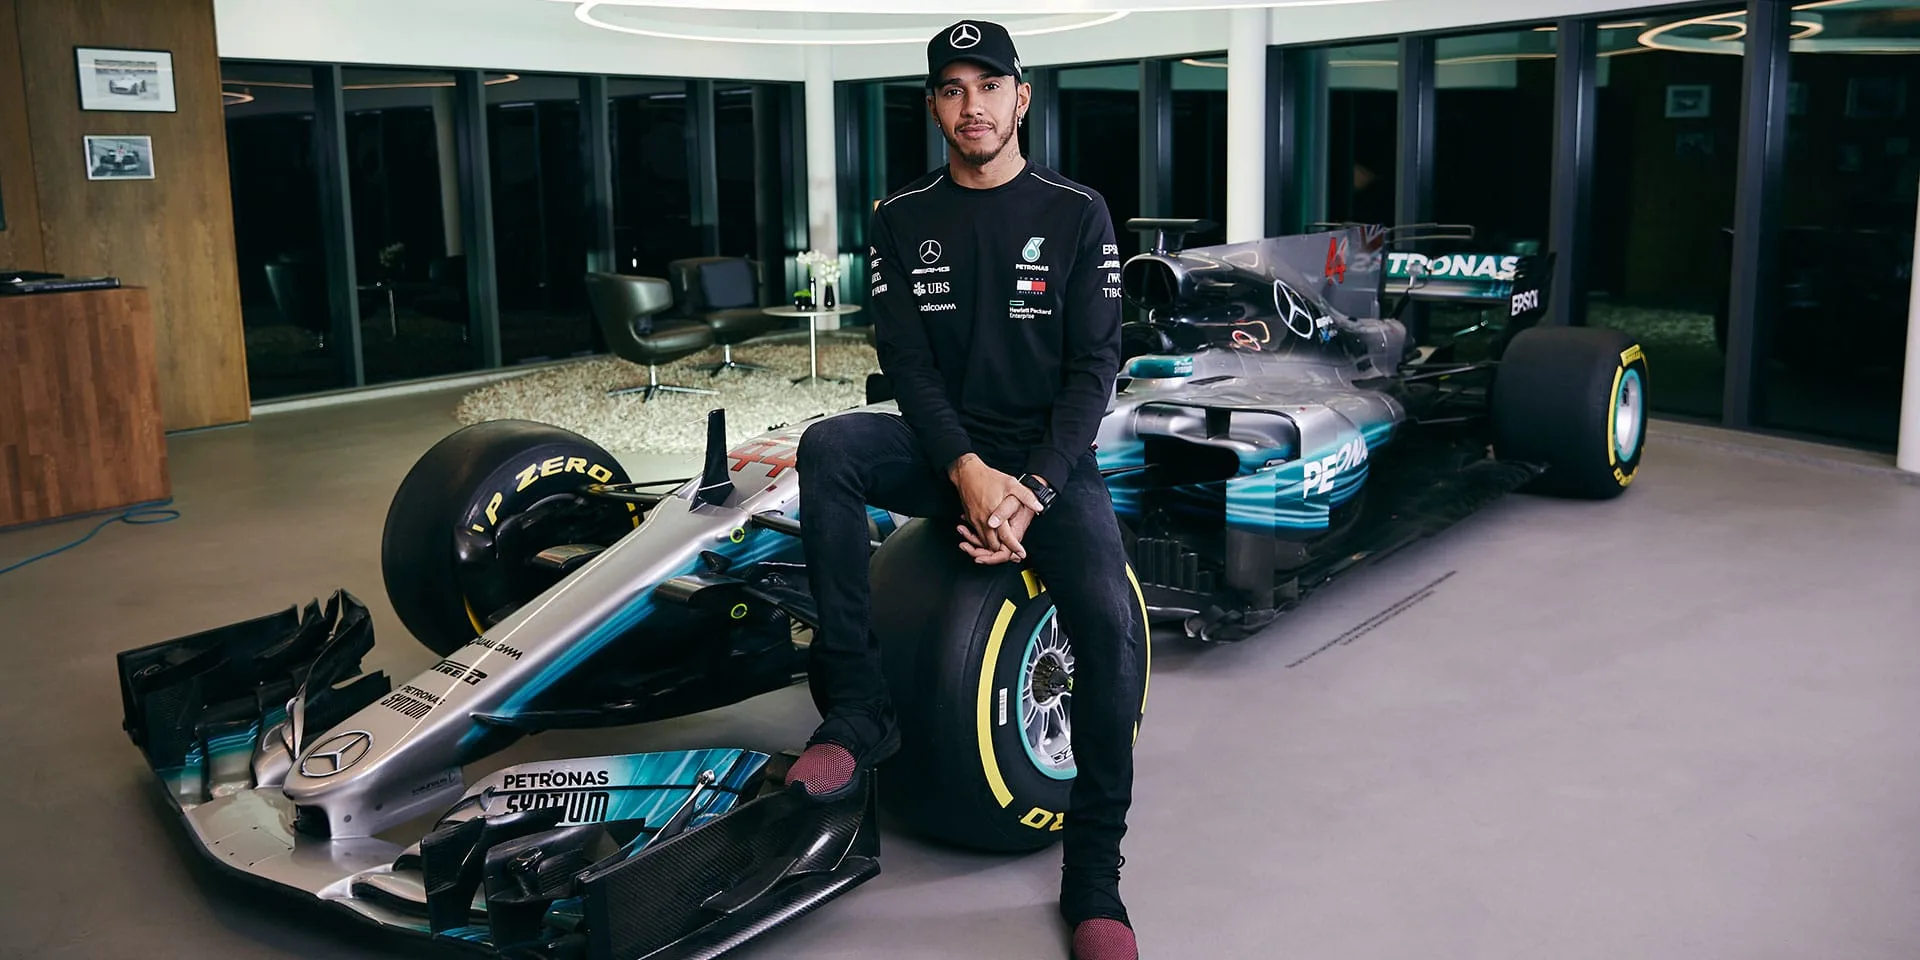 A collage of Lewis Hamilton in his racing suit, Mercedes logo, and Ferrari logo, symbolizing the sensational move of the seven-time Formula One champion from Mercedes to Ferrari for the 2025 season.